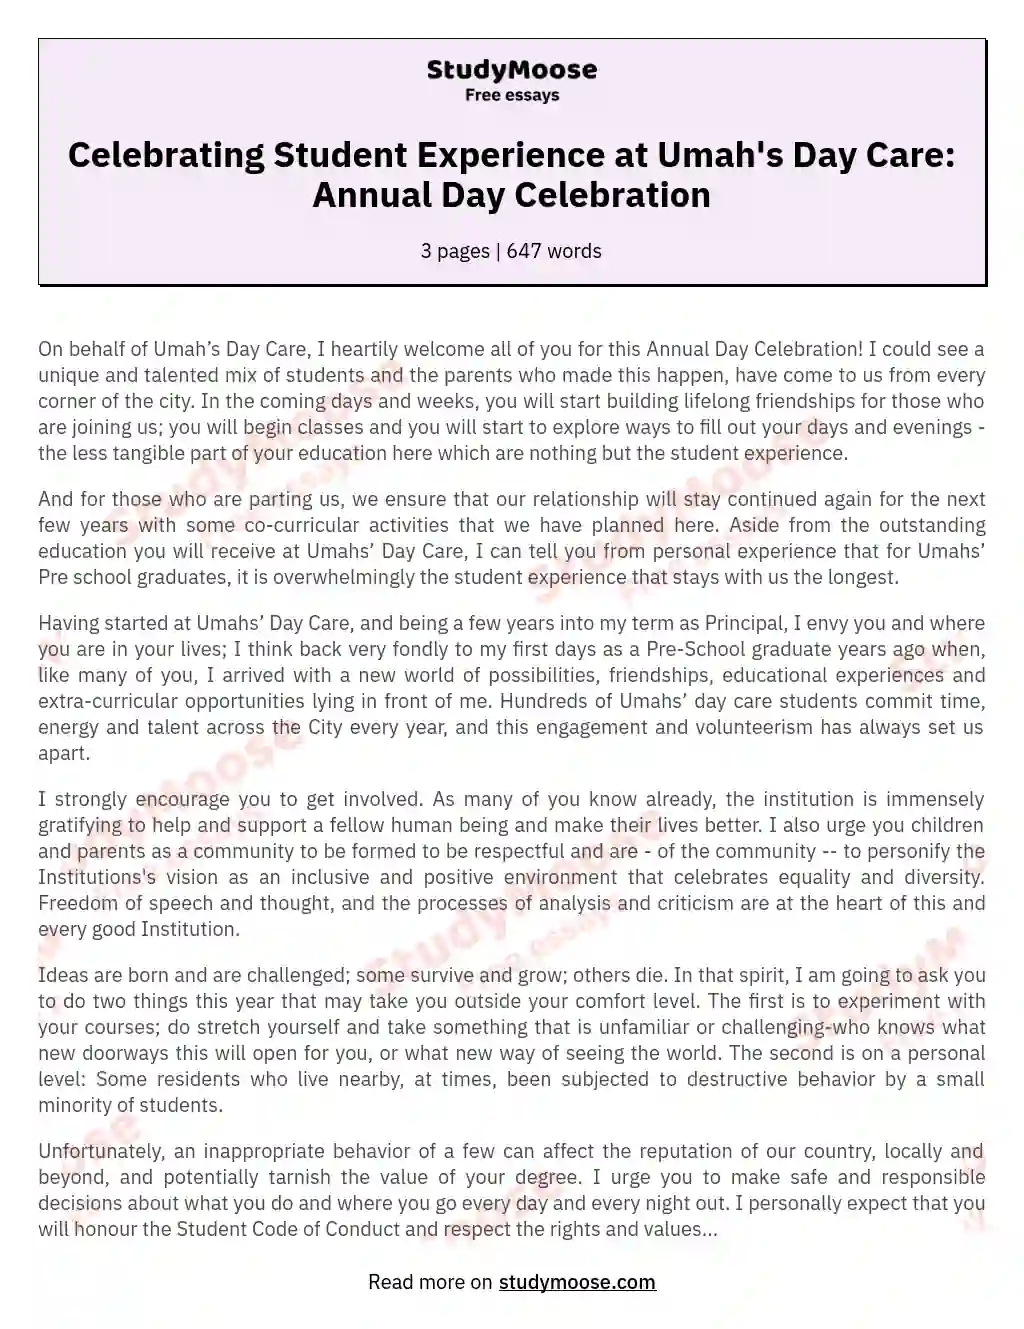 Celebrating Student Experience at Umah's Day Care: Annual Day Celebration essay